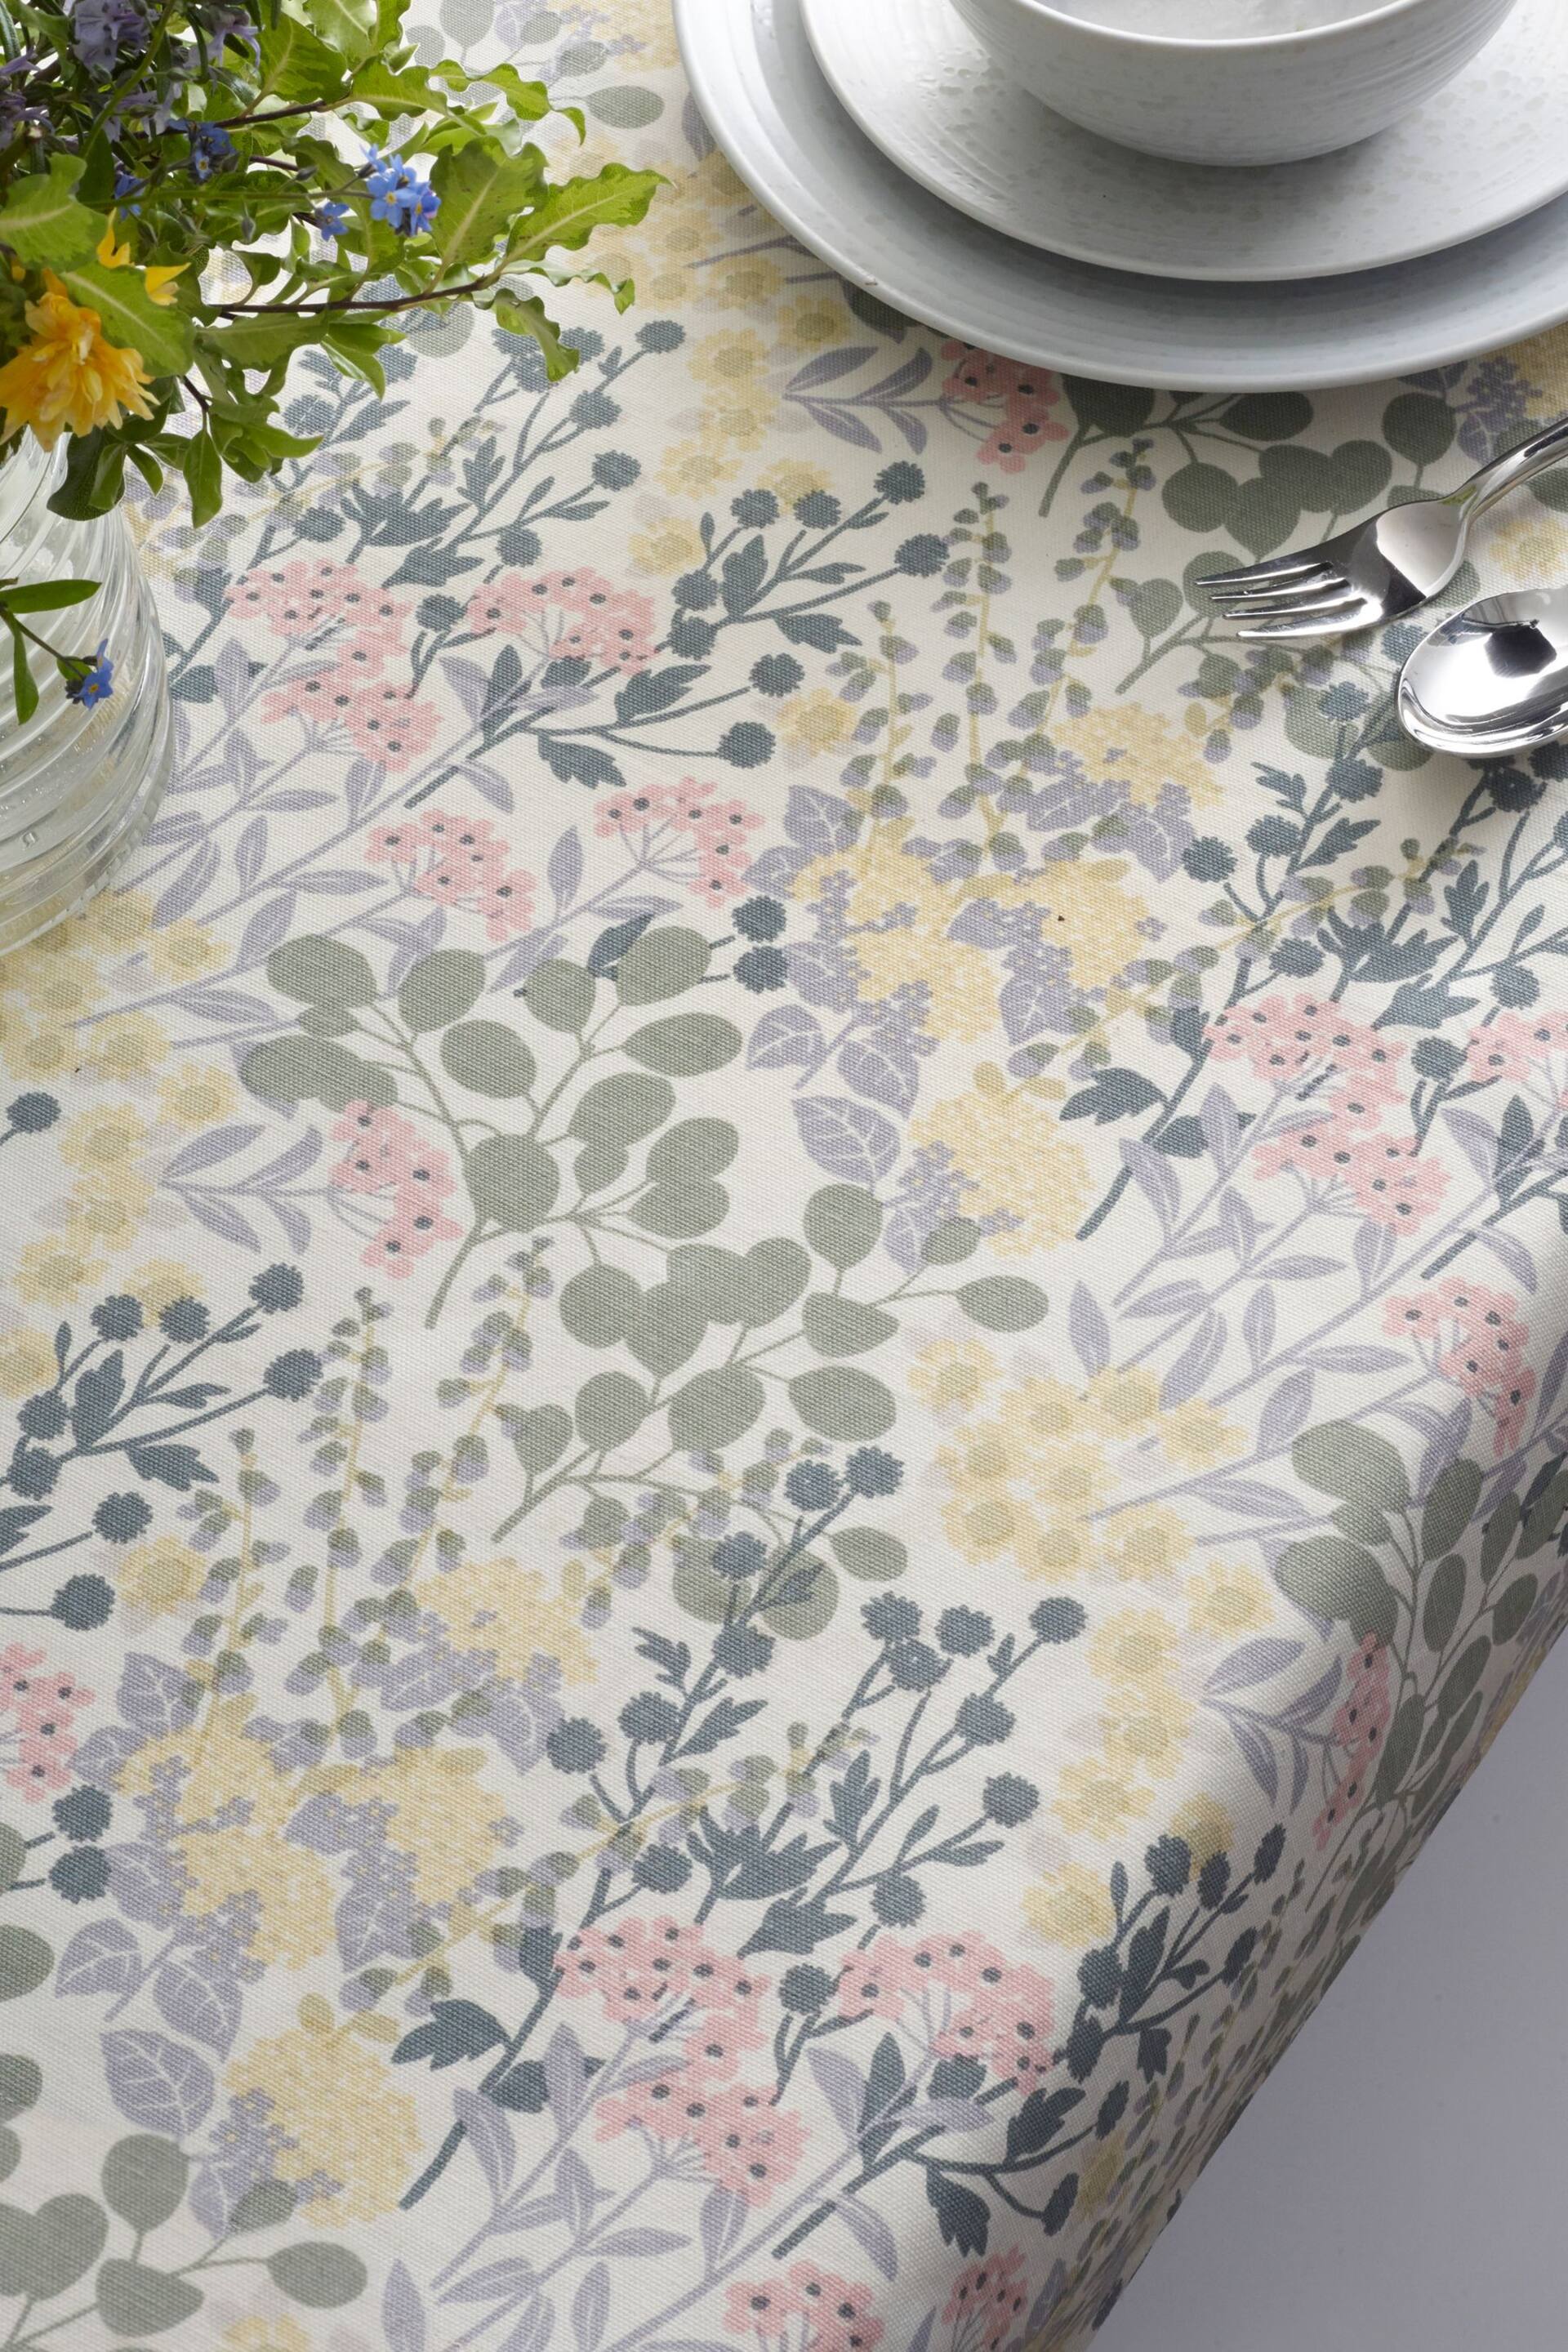 Nordic Esme Floral Wipe Clean Table Cloth With Linen - Image 3 of 3